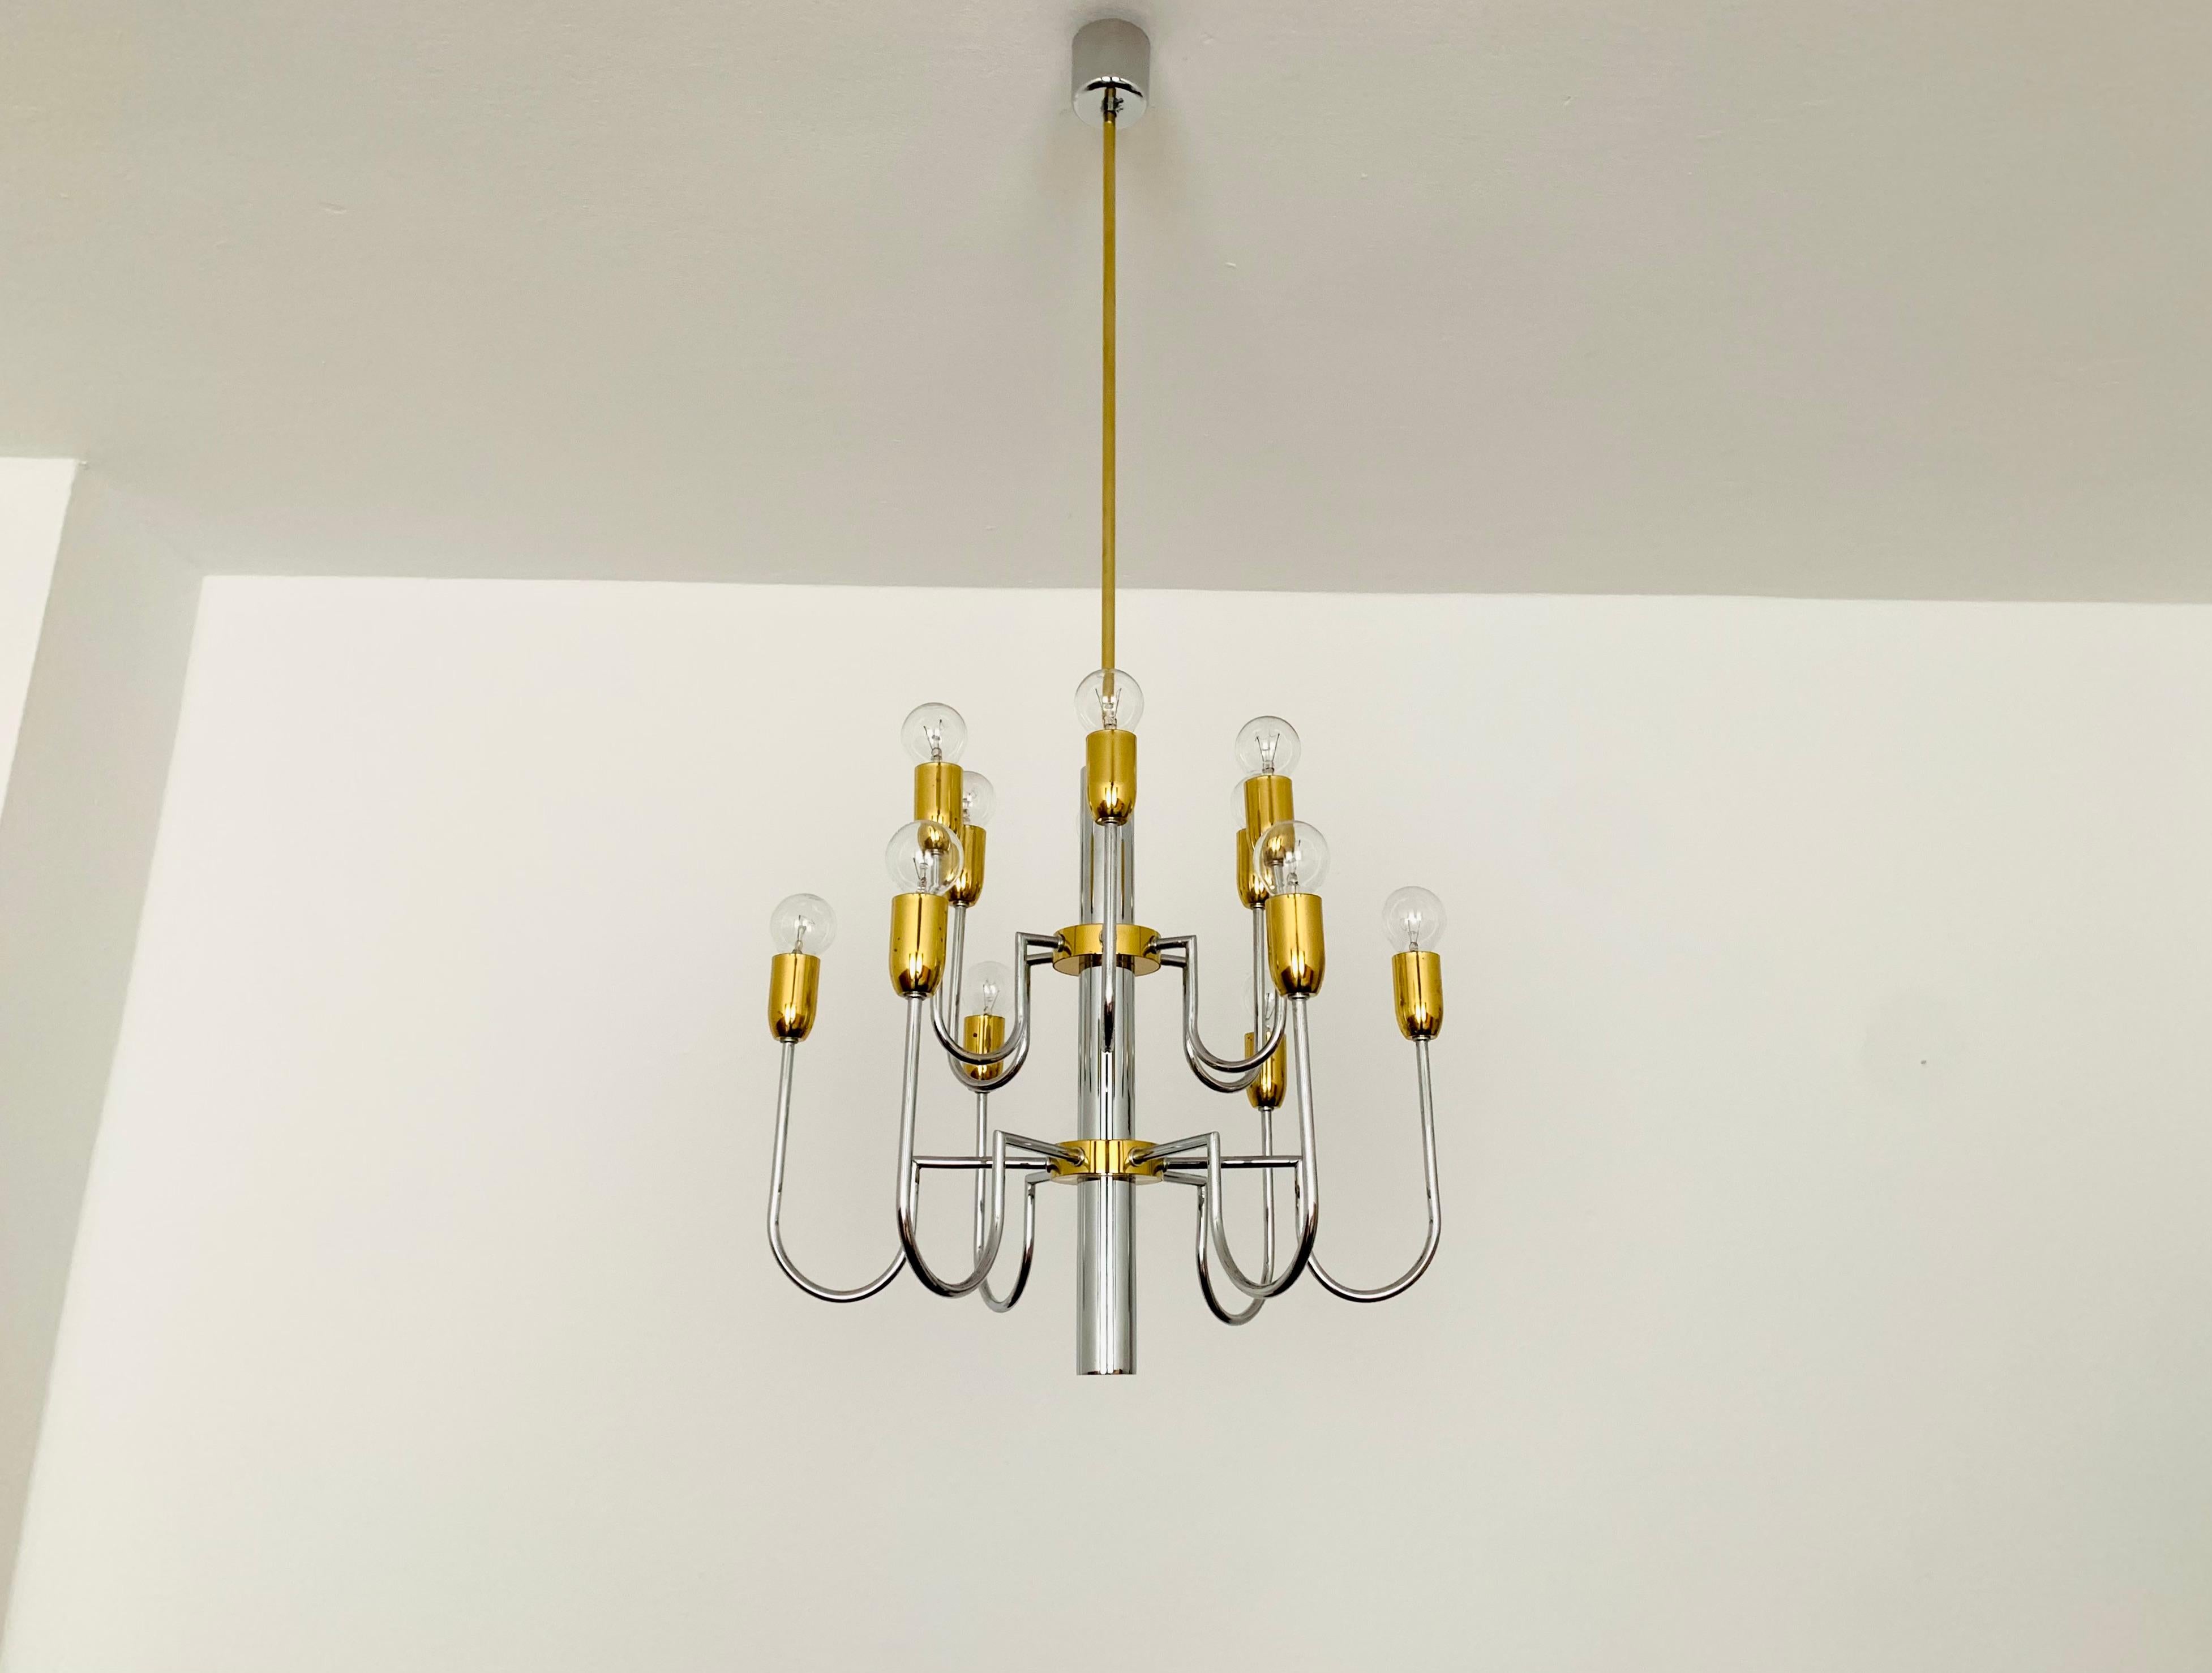 Impressive Holywood Regency chandelier from the 1970s.
The lamp looks very noble and elegant due to the two-tone design.
Impressive contemporary design and an asset to any home.
An exciting, sparkling play of light is created in the